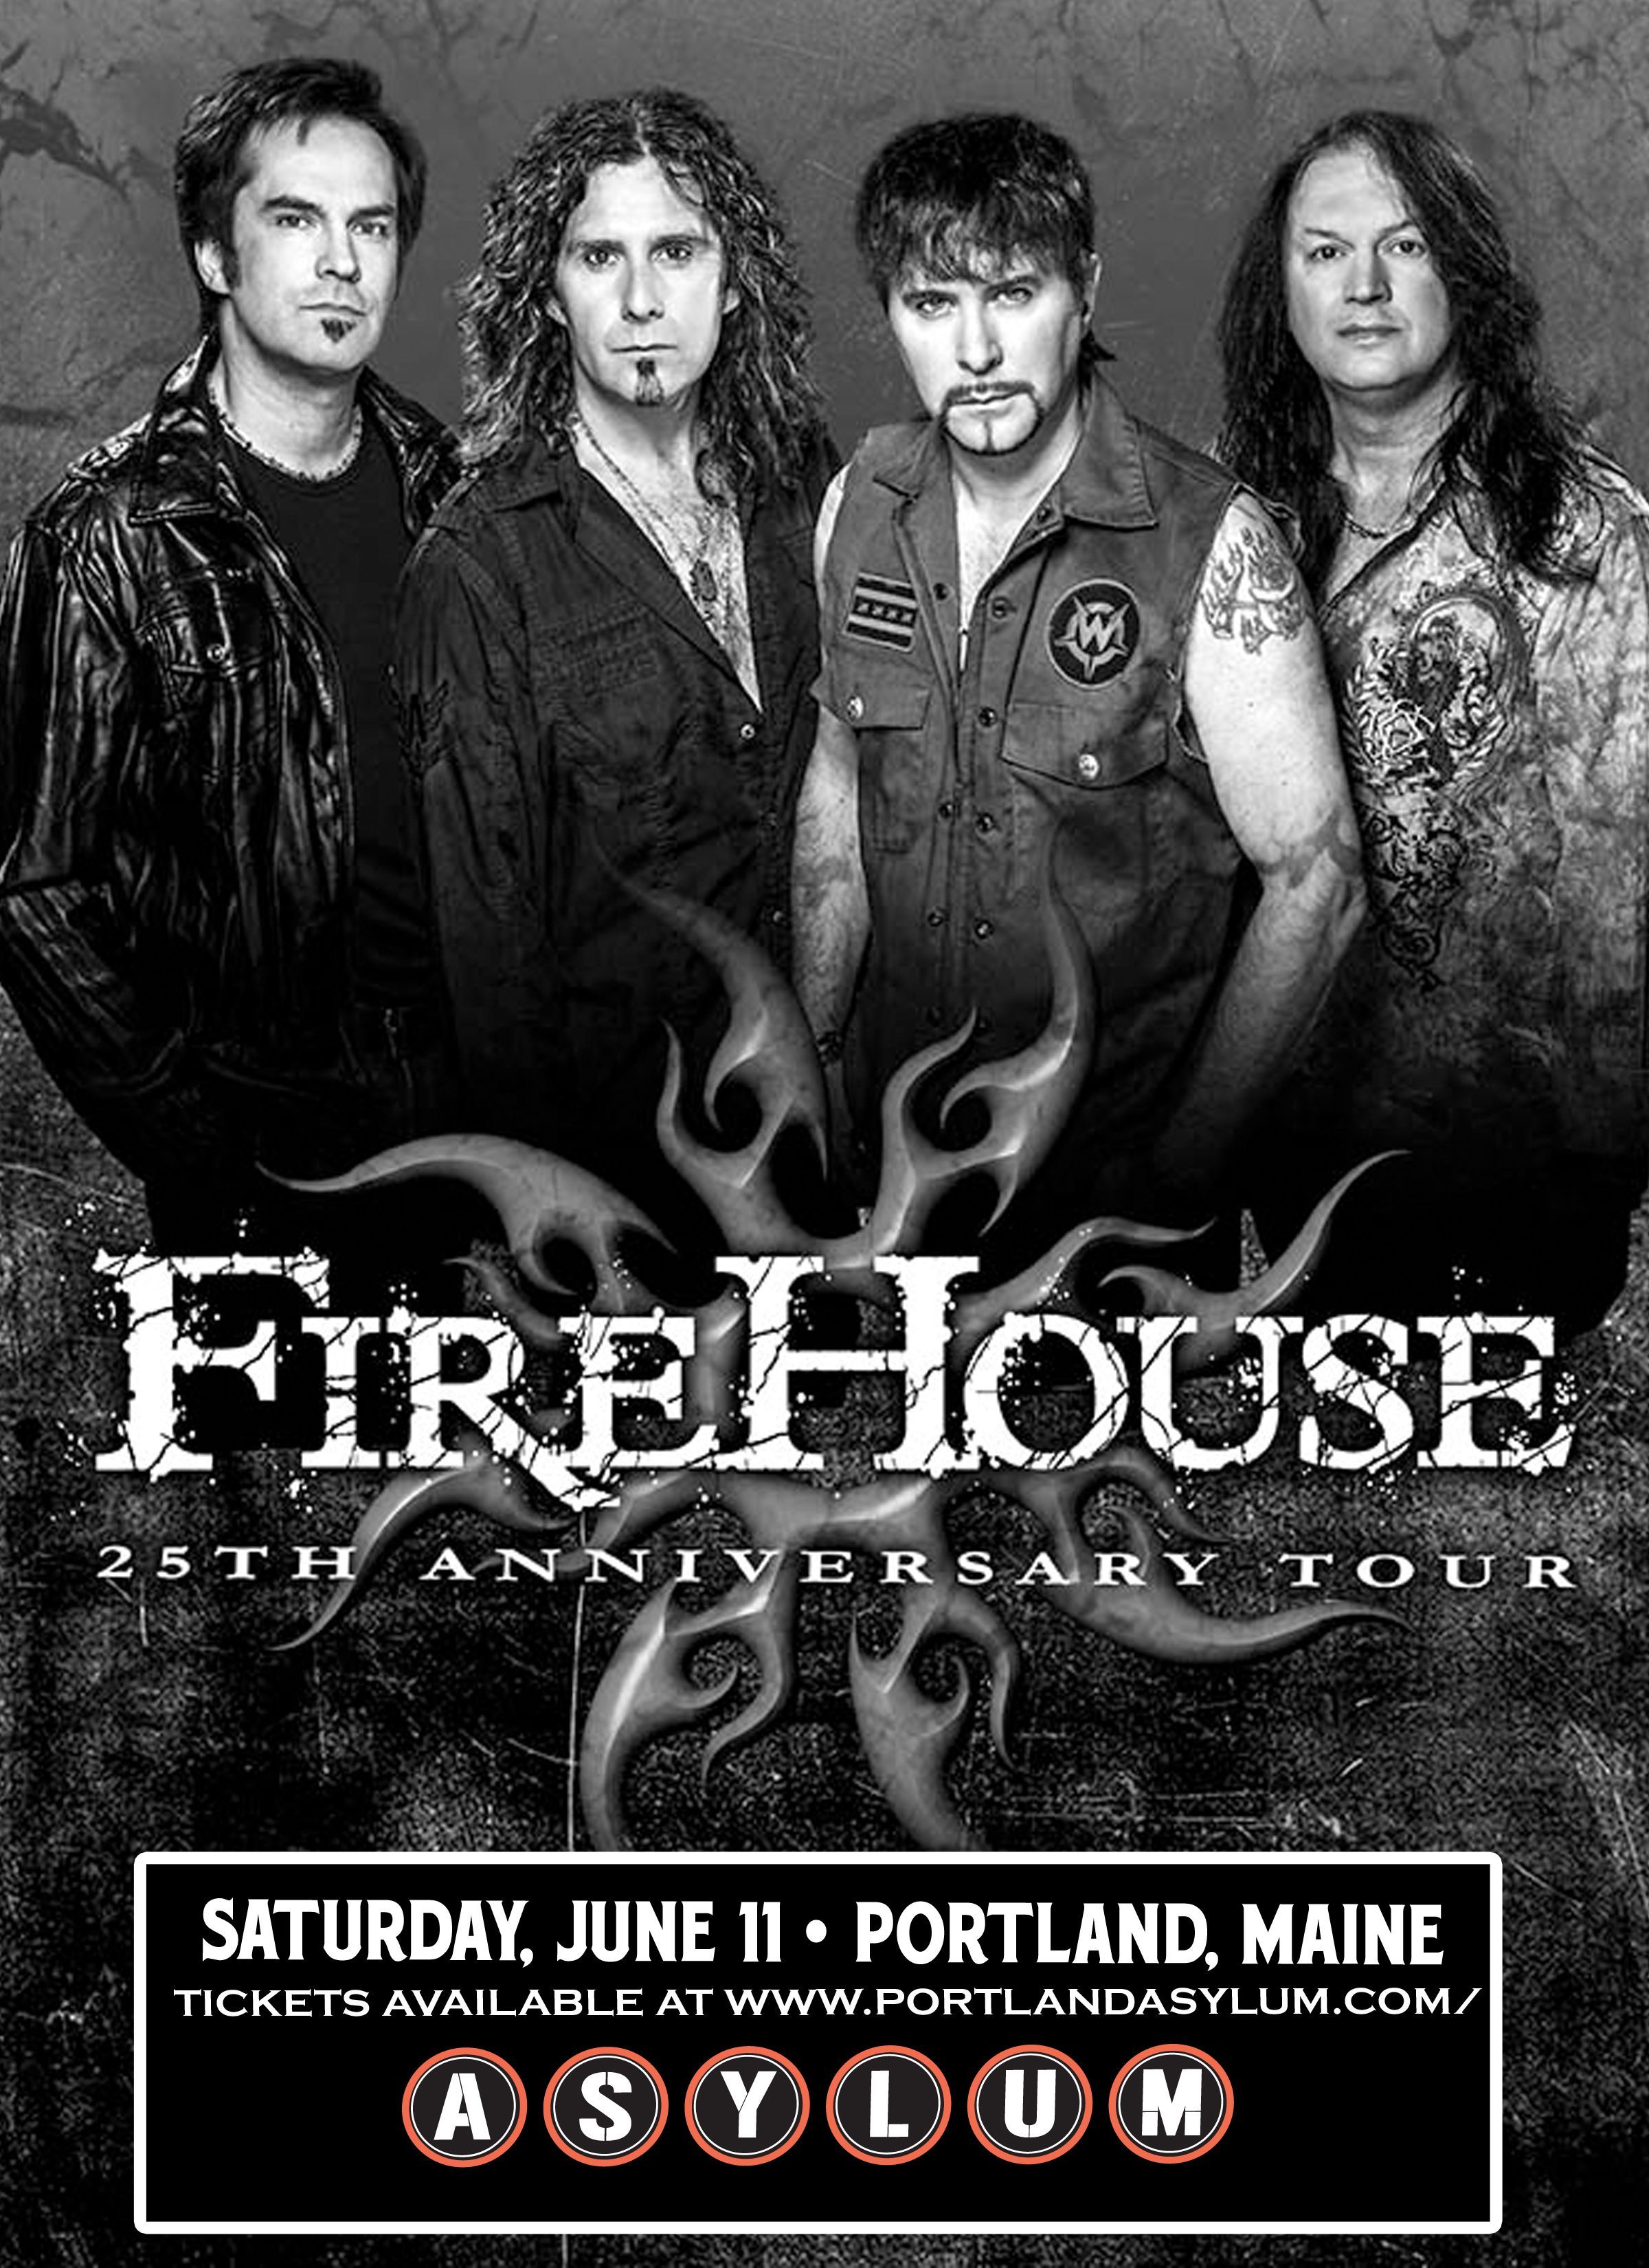 Love firehouse ideas. firehouse band, heavy metal bands, love of a lifetime